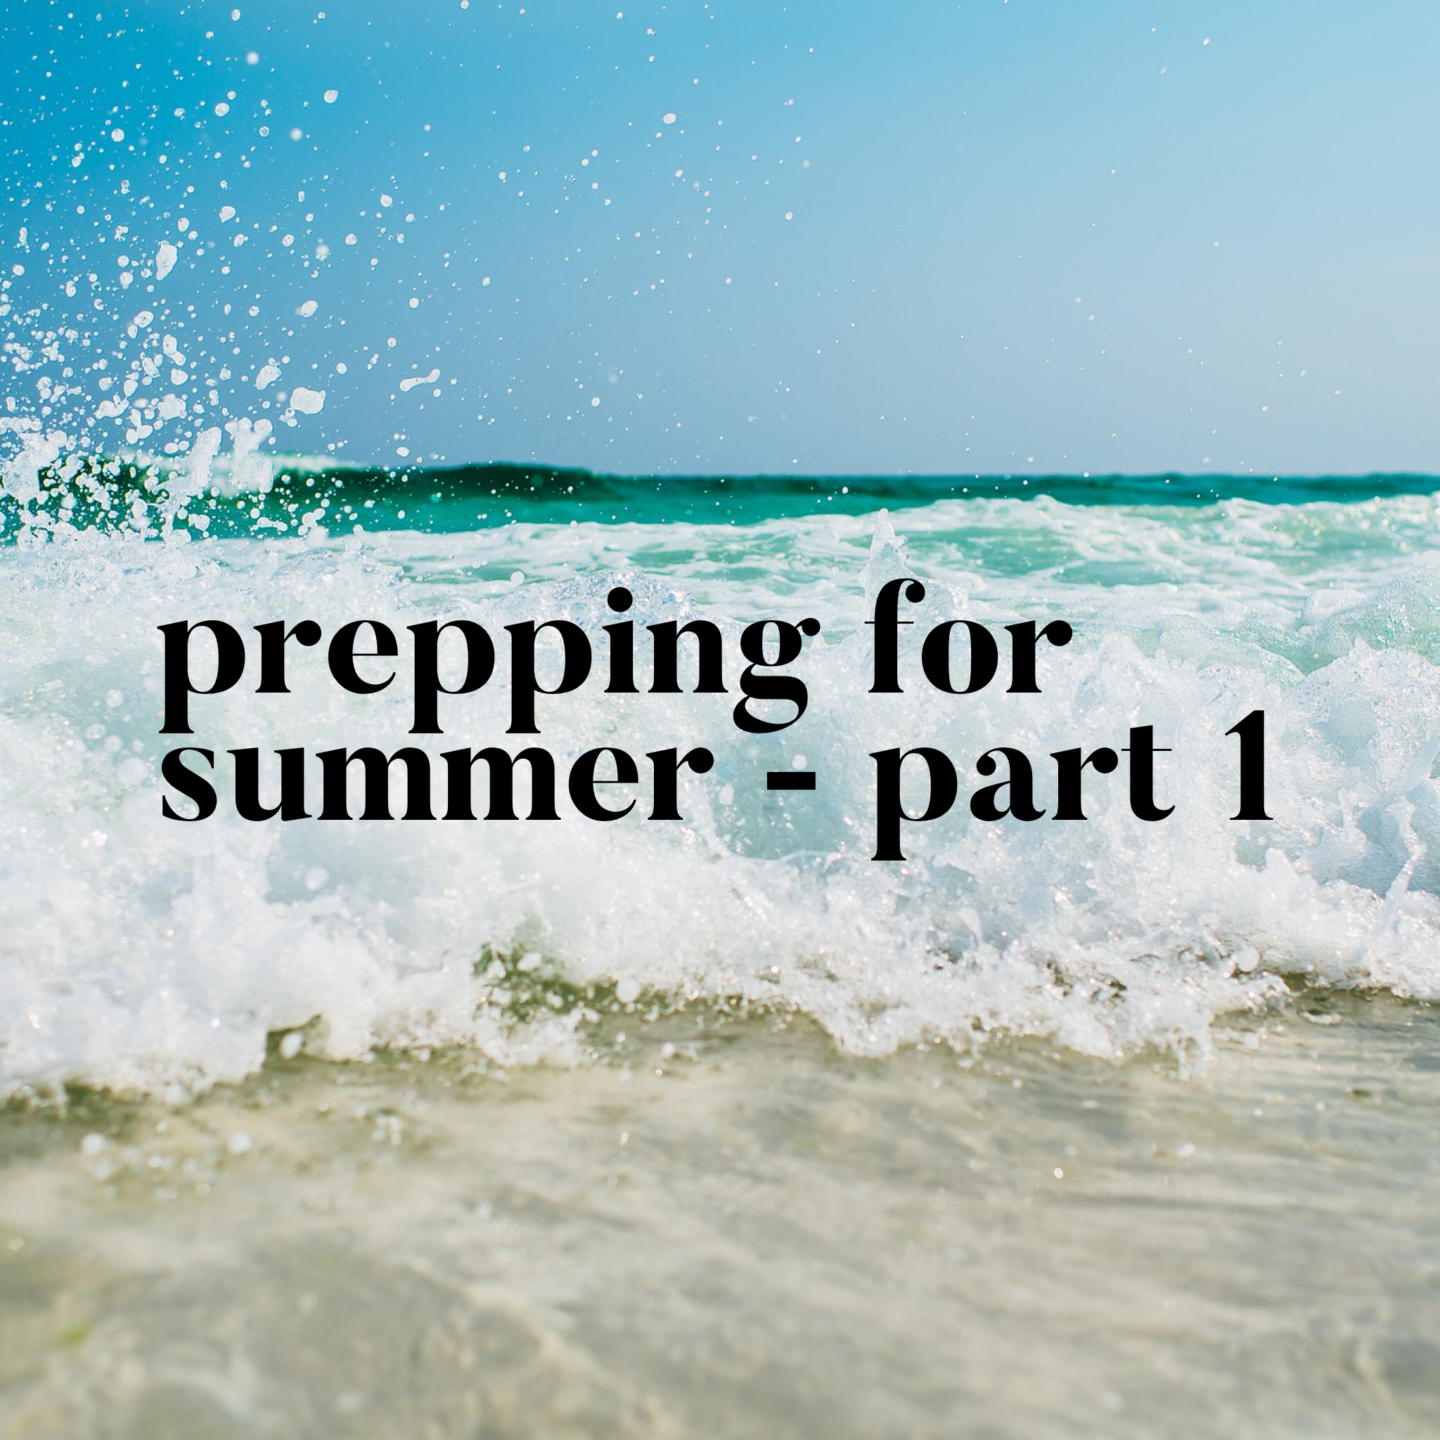 Prepping for Summer – Part 1